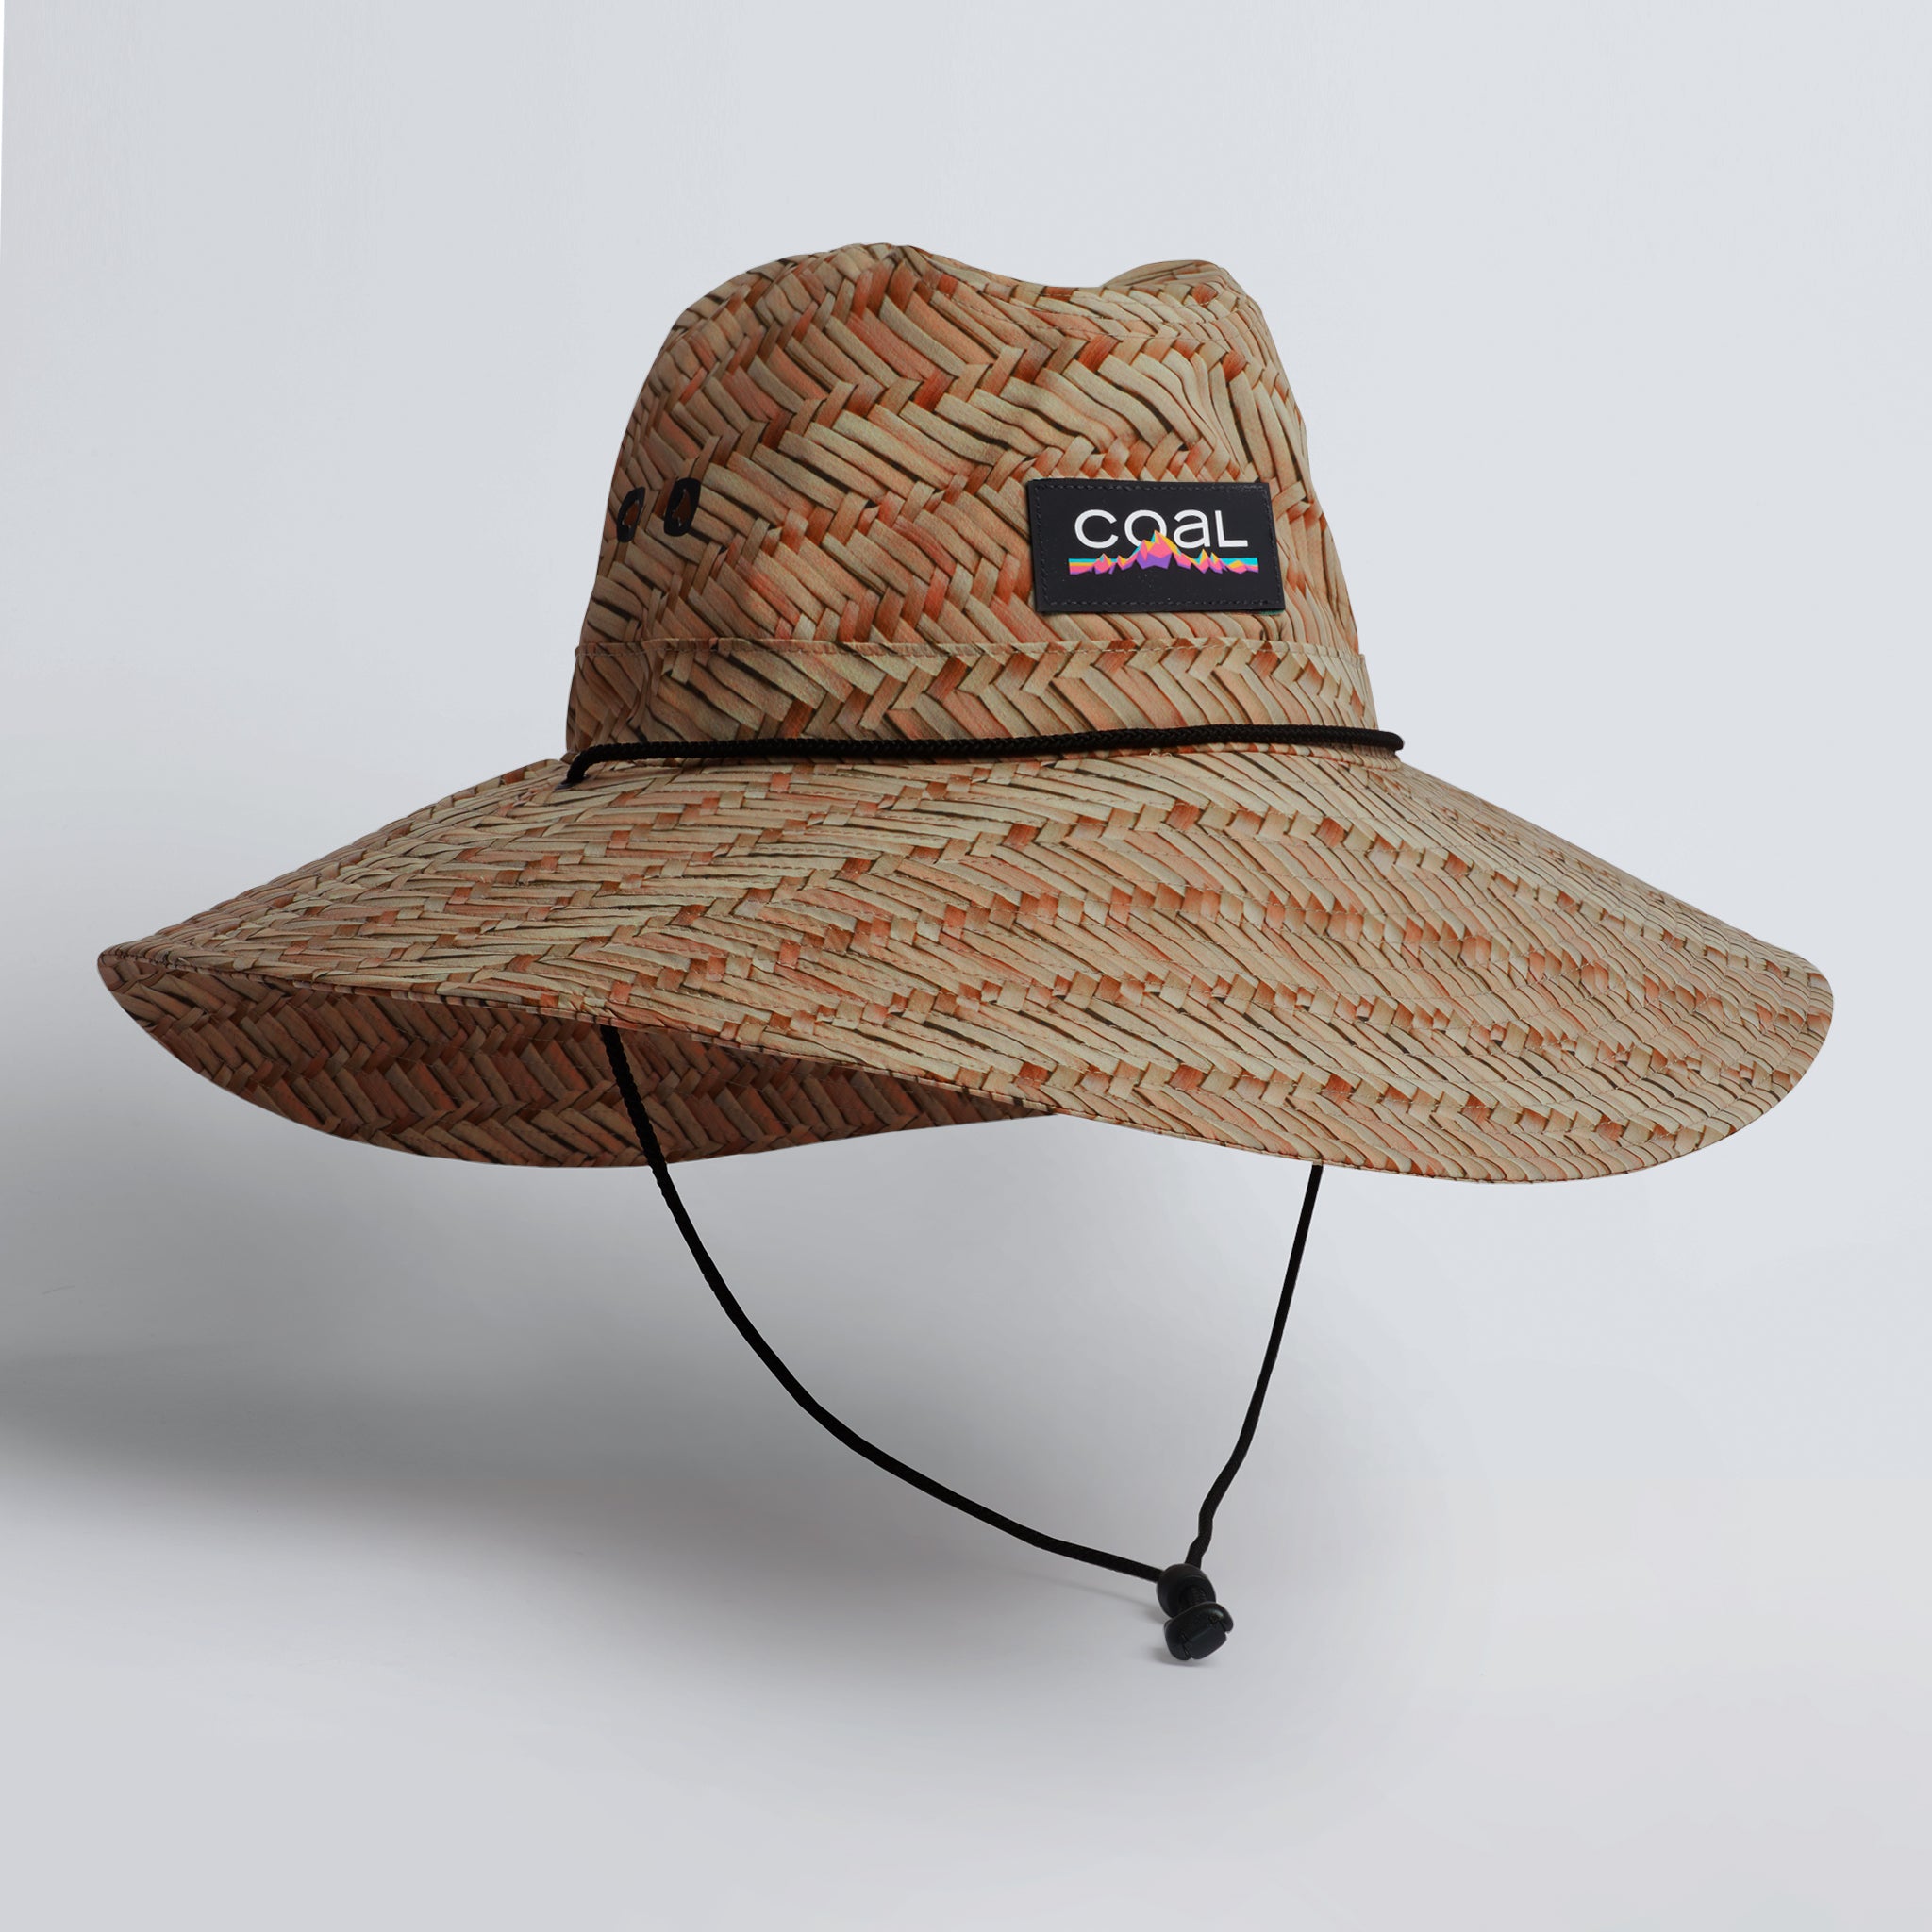 Fishing hat made of lightweight recycled material